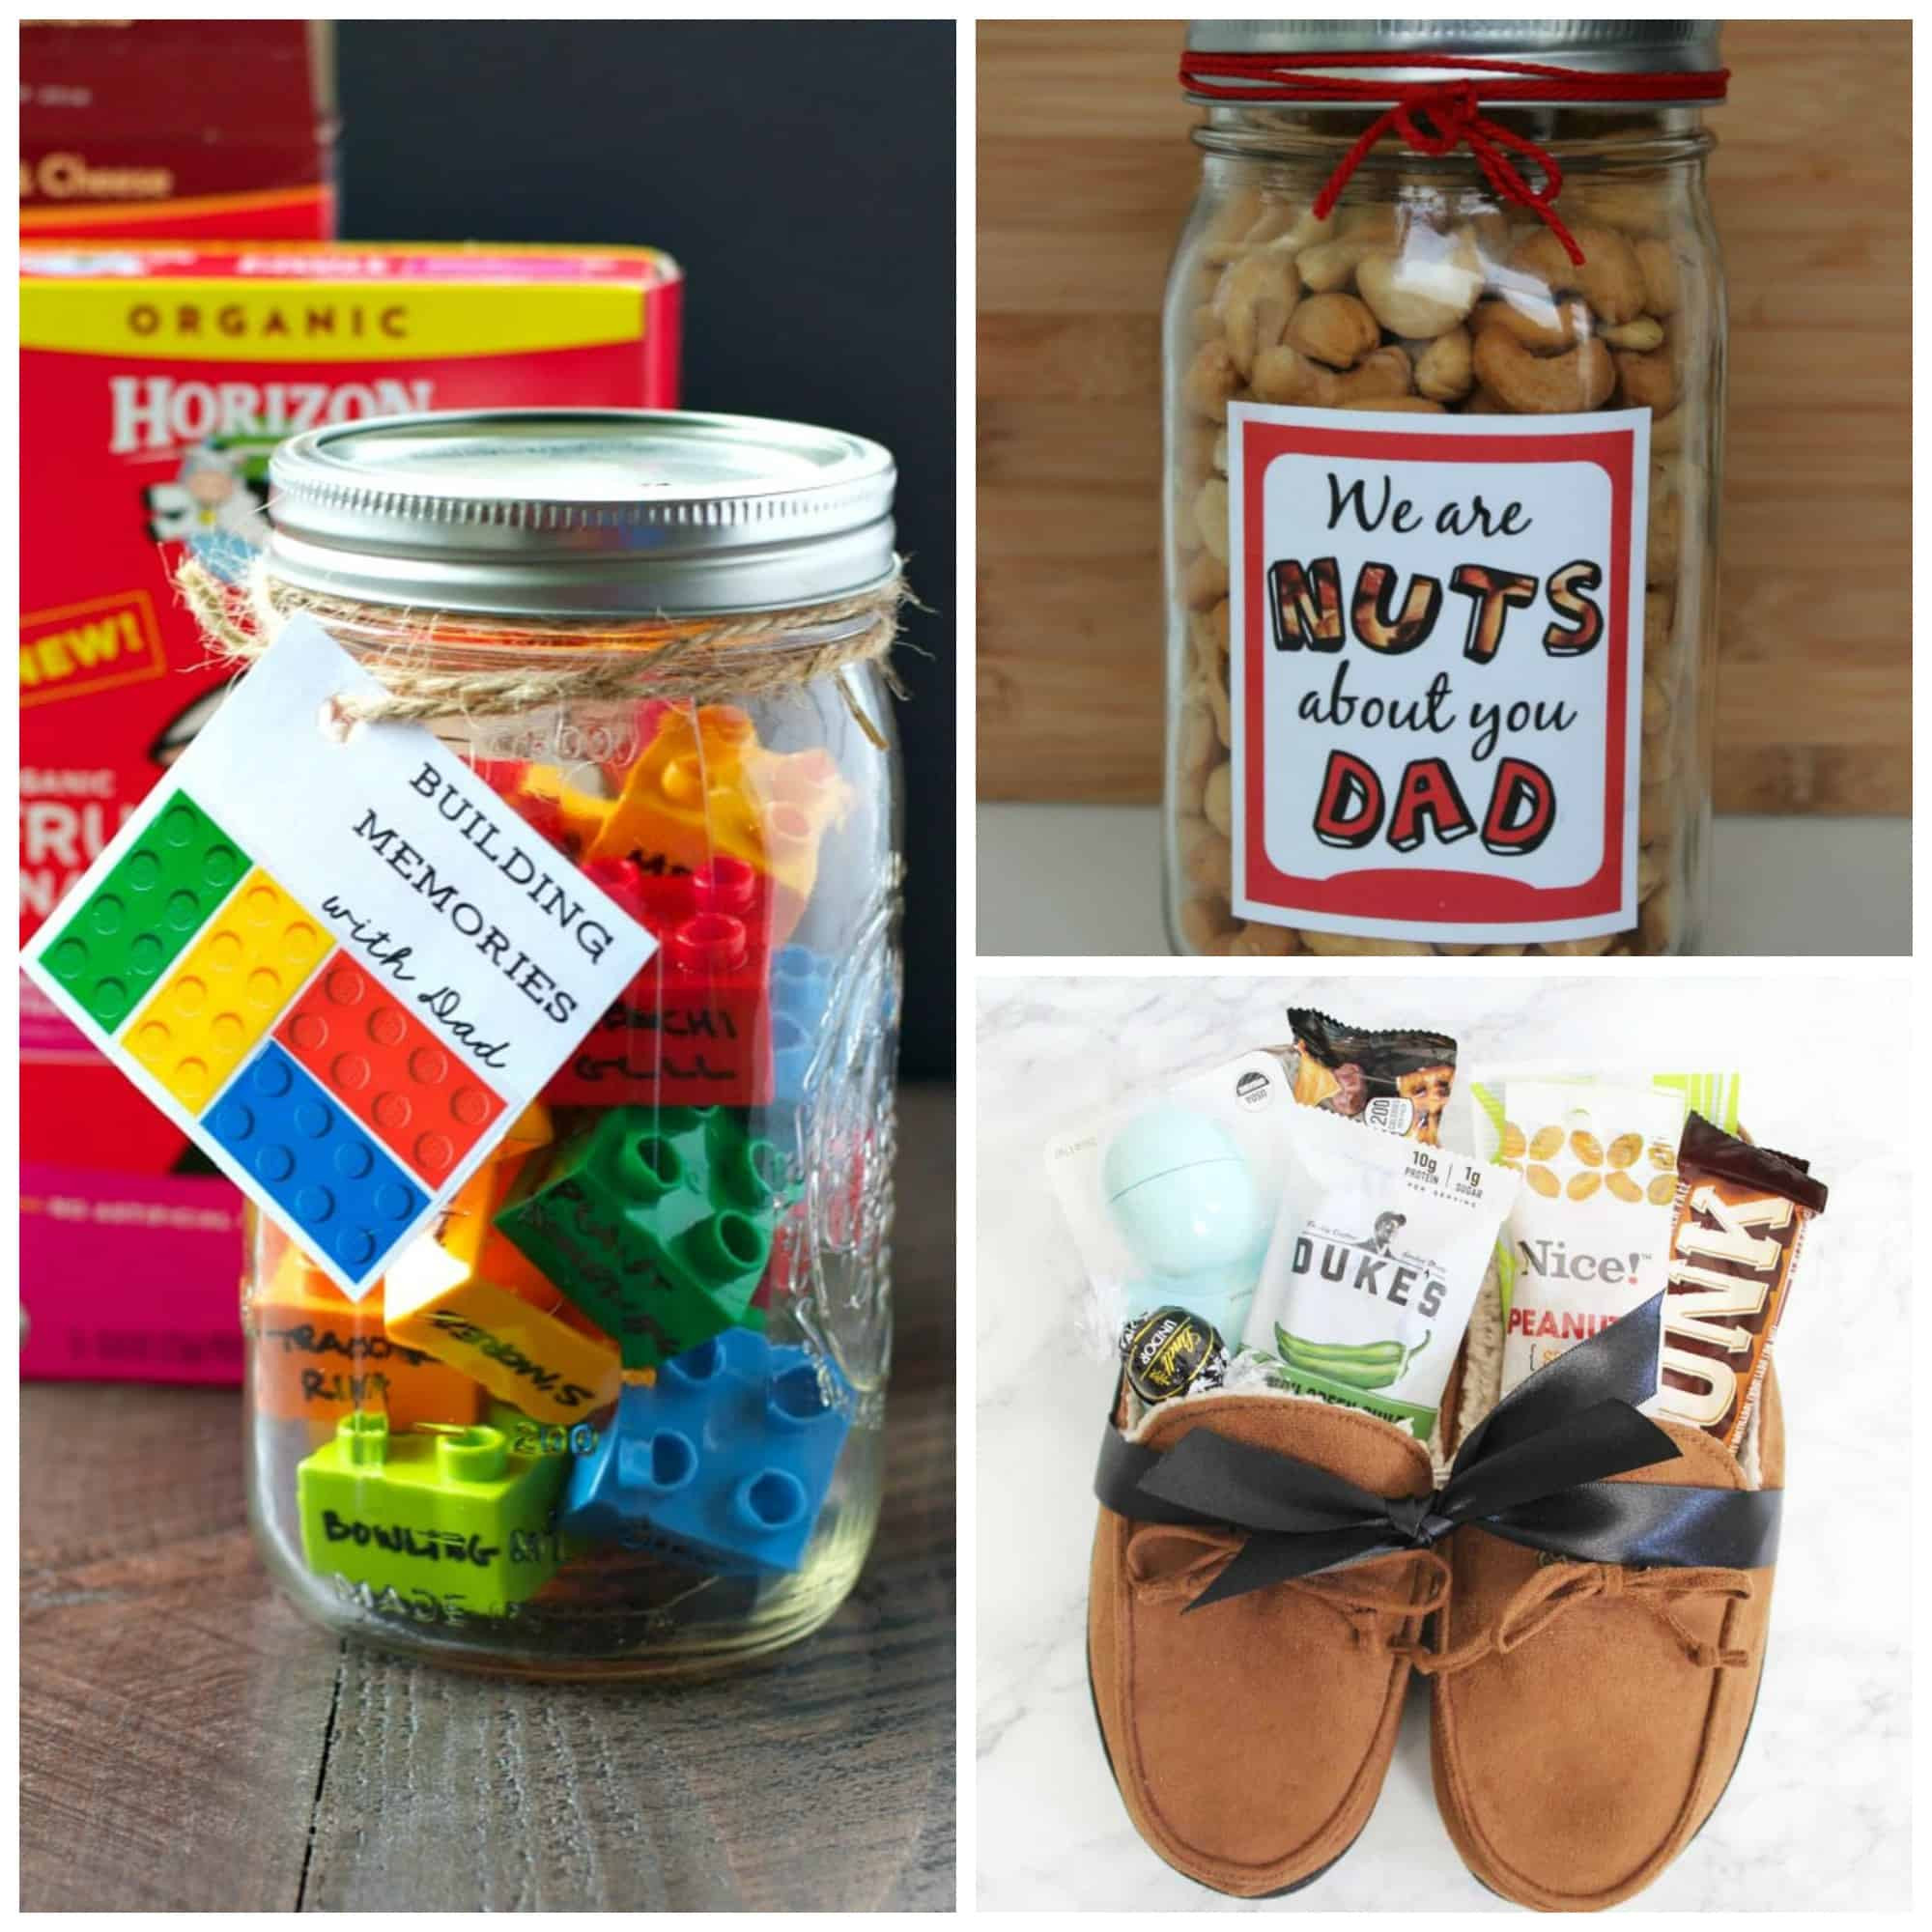 DIY Fathers Day Gift Ideas
 The Ultimate DIY Father s Day Gift Idea List